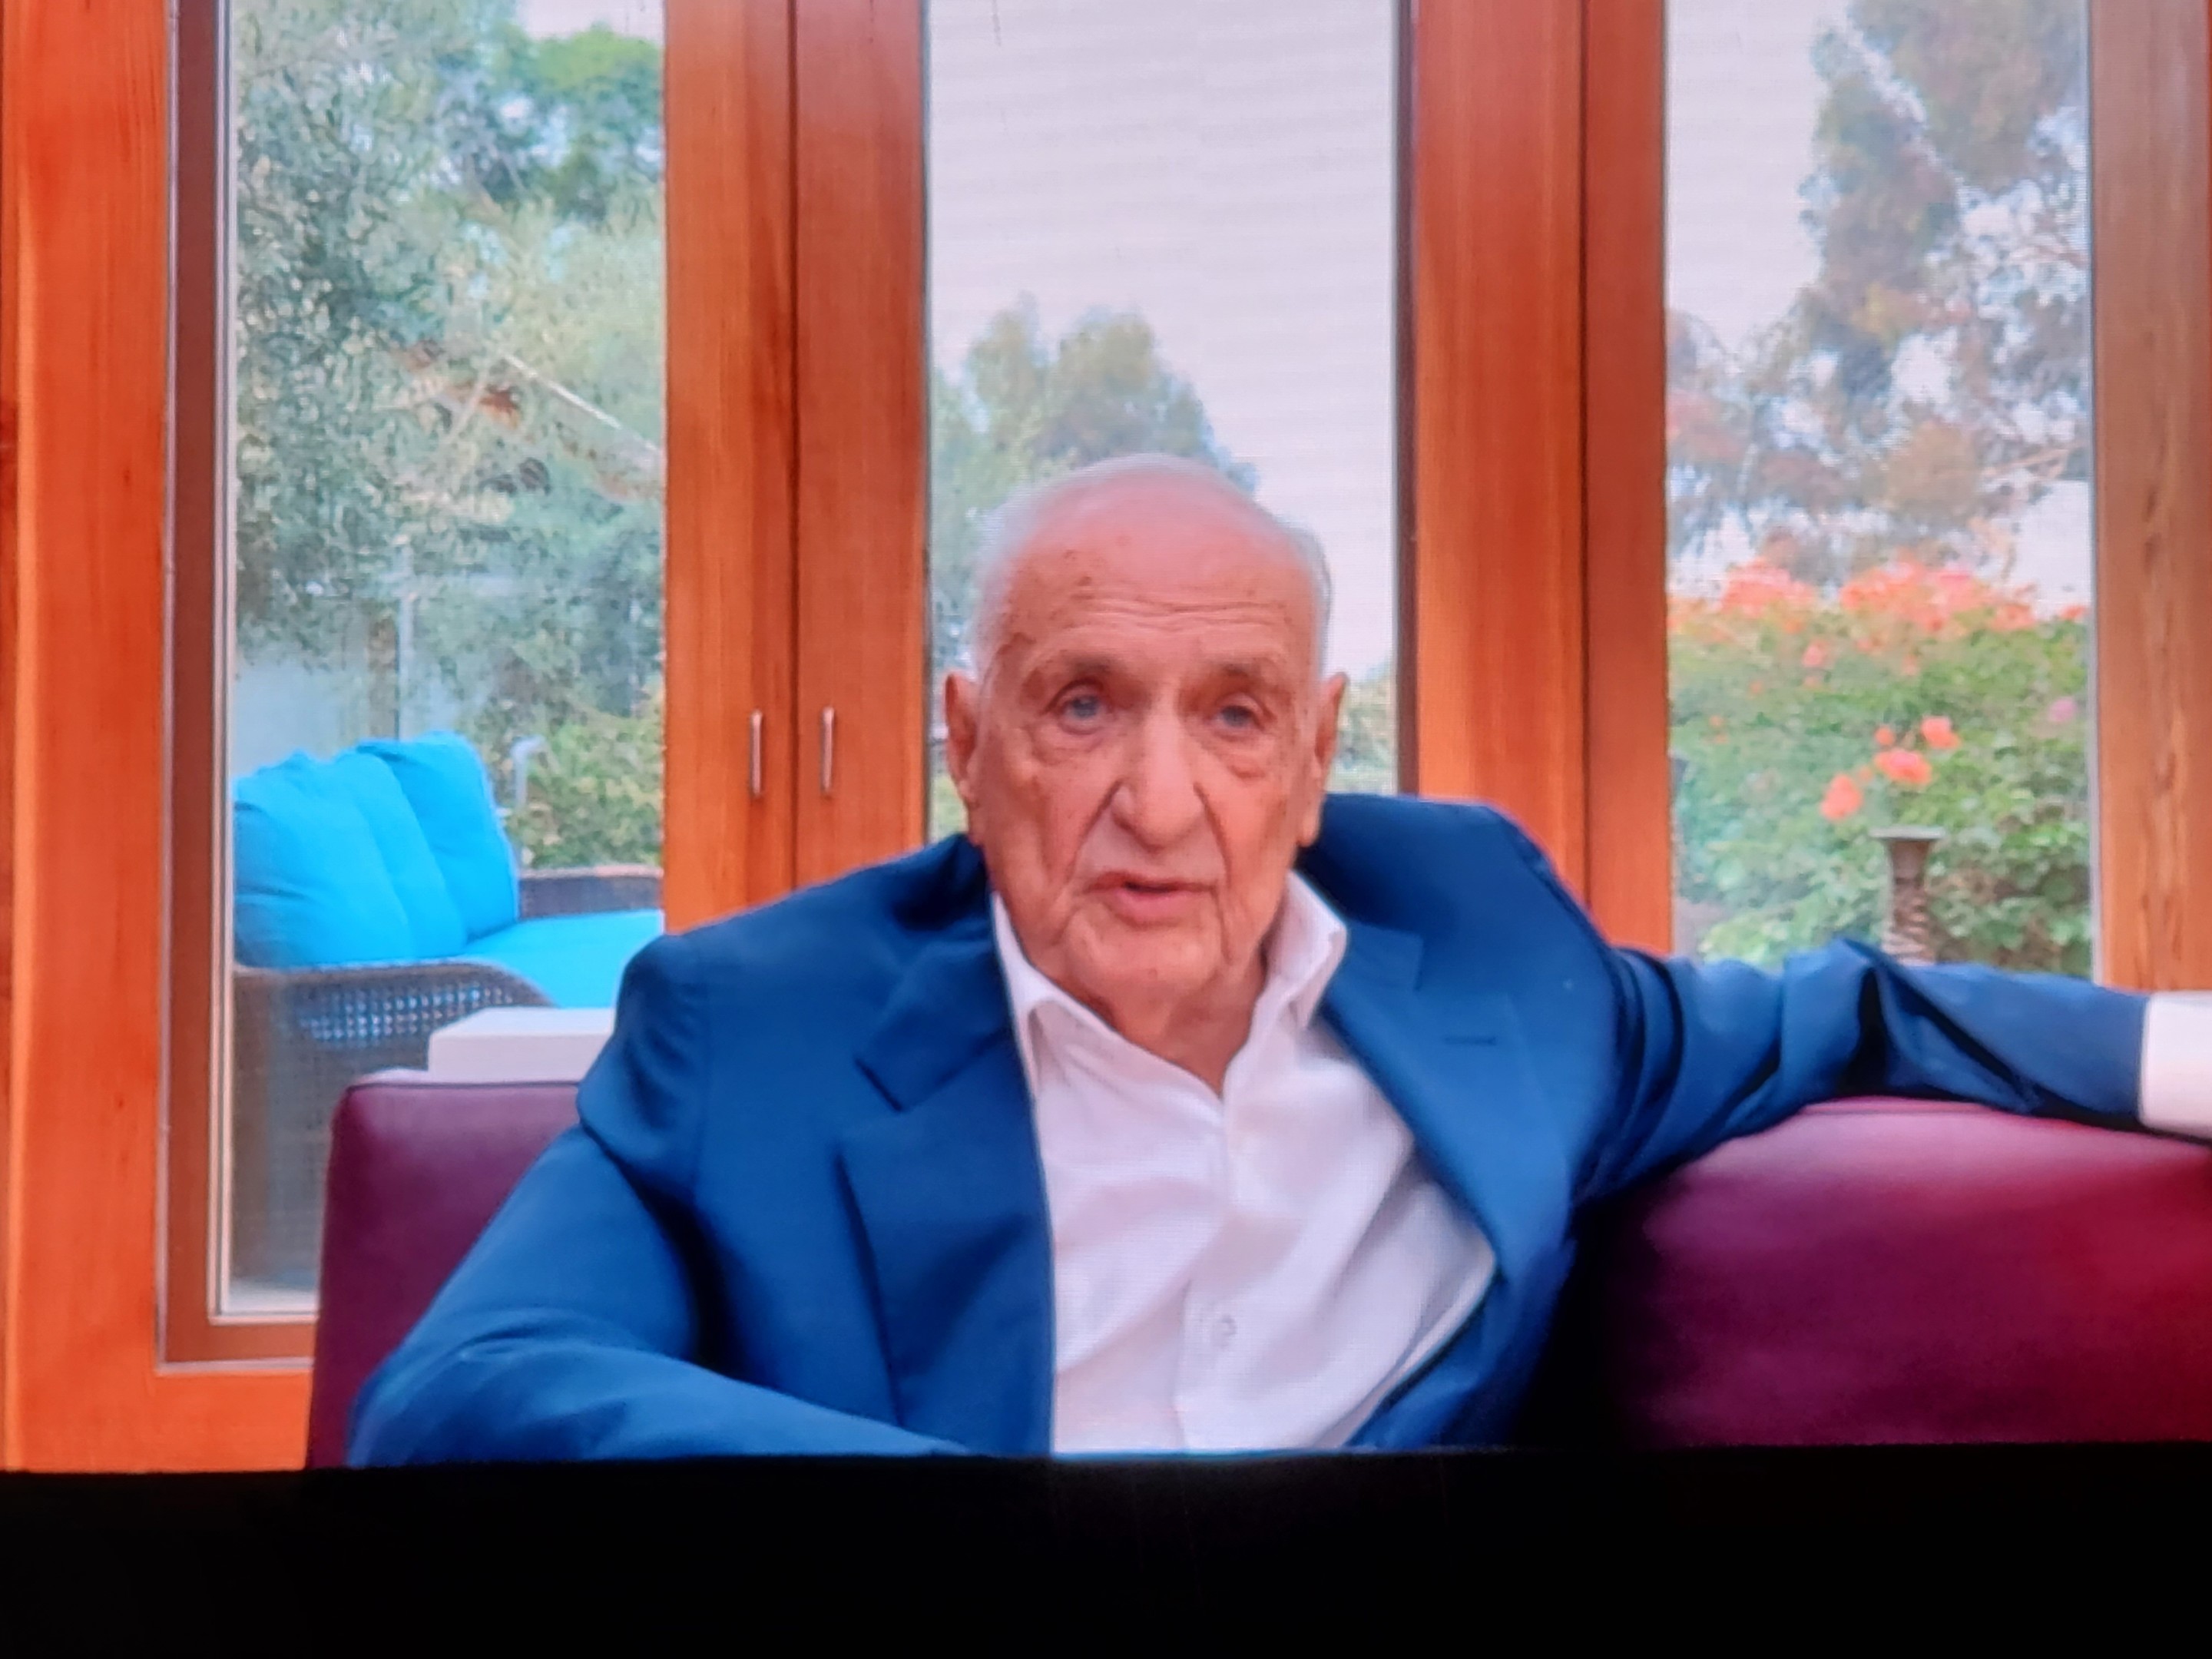 Frank Gehry, an elderly man, delivering comments on a video screen